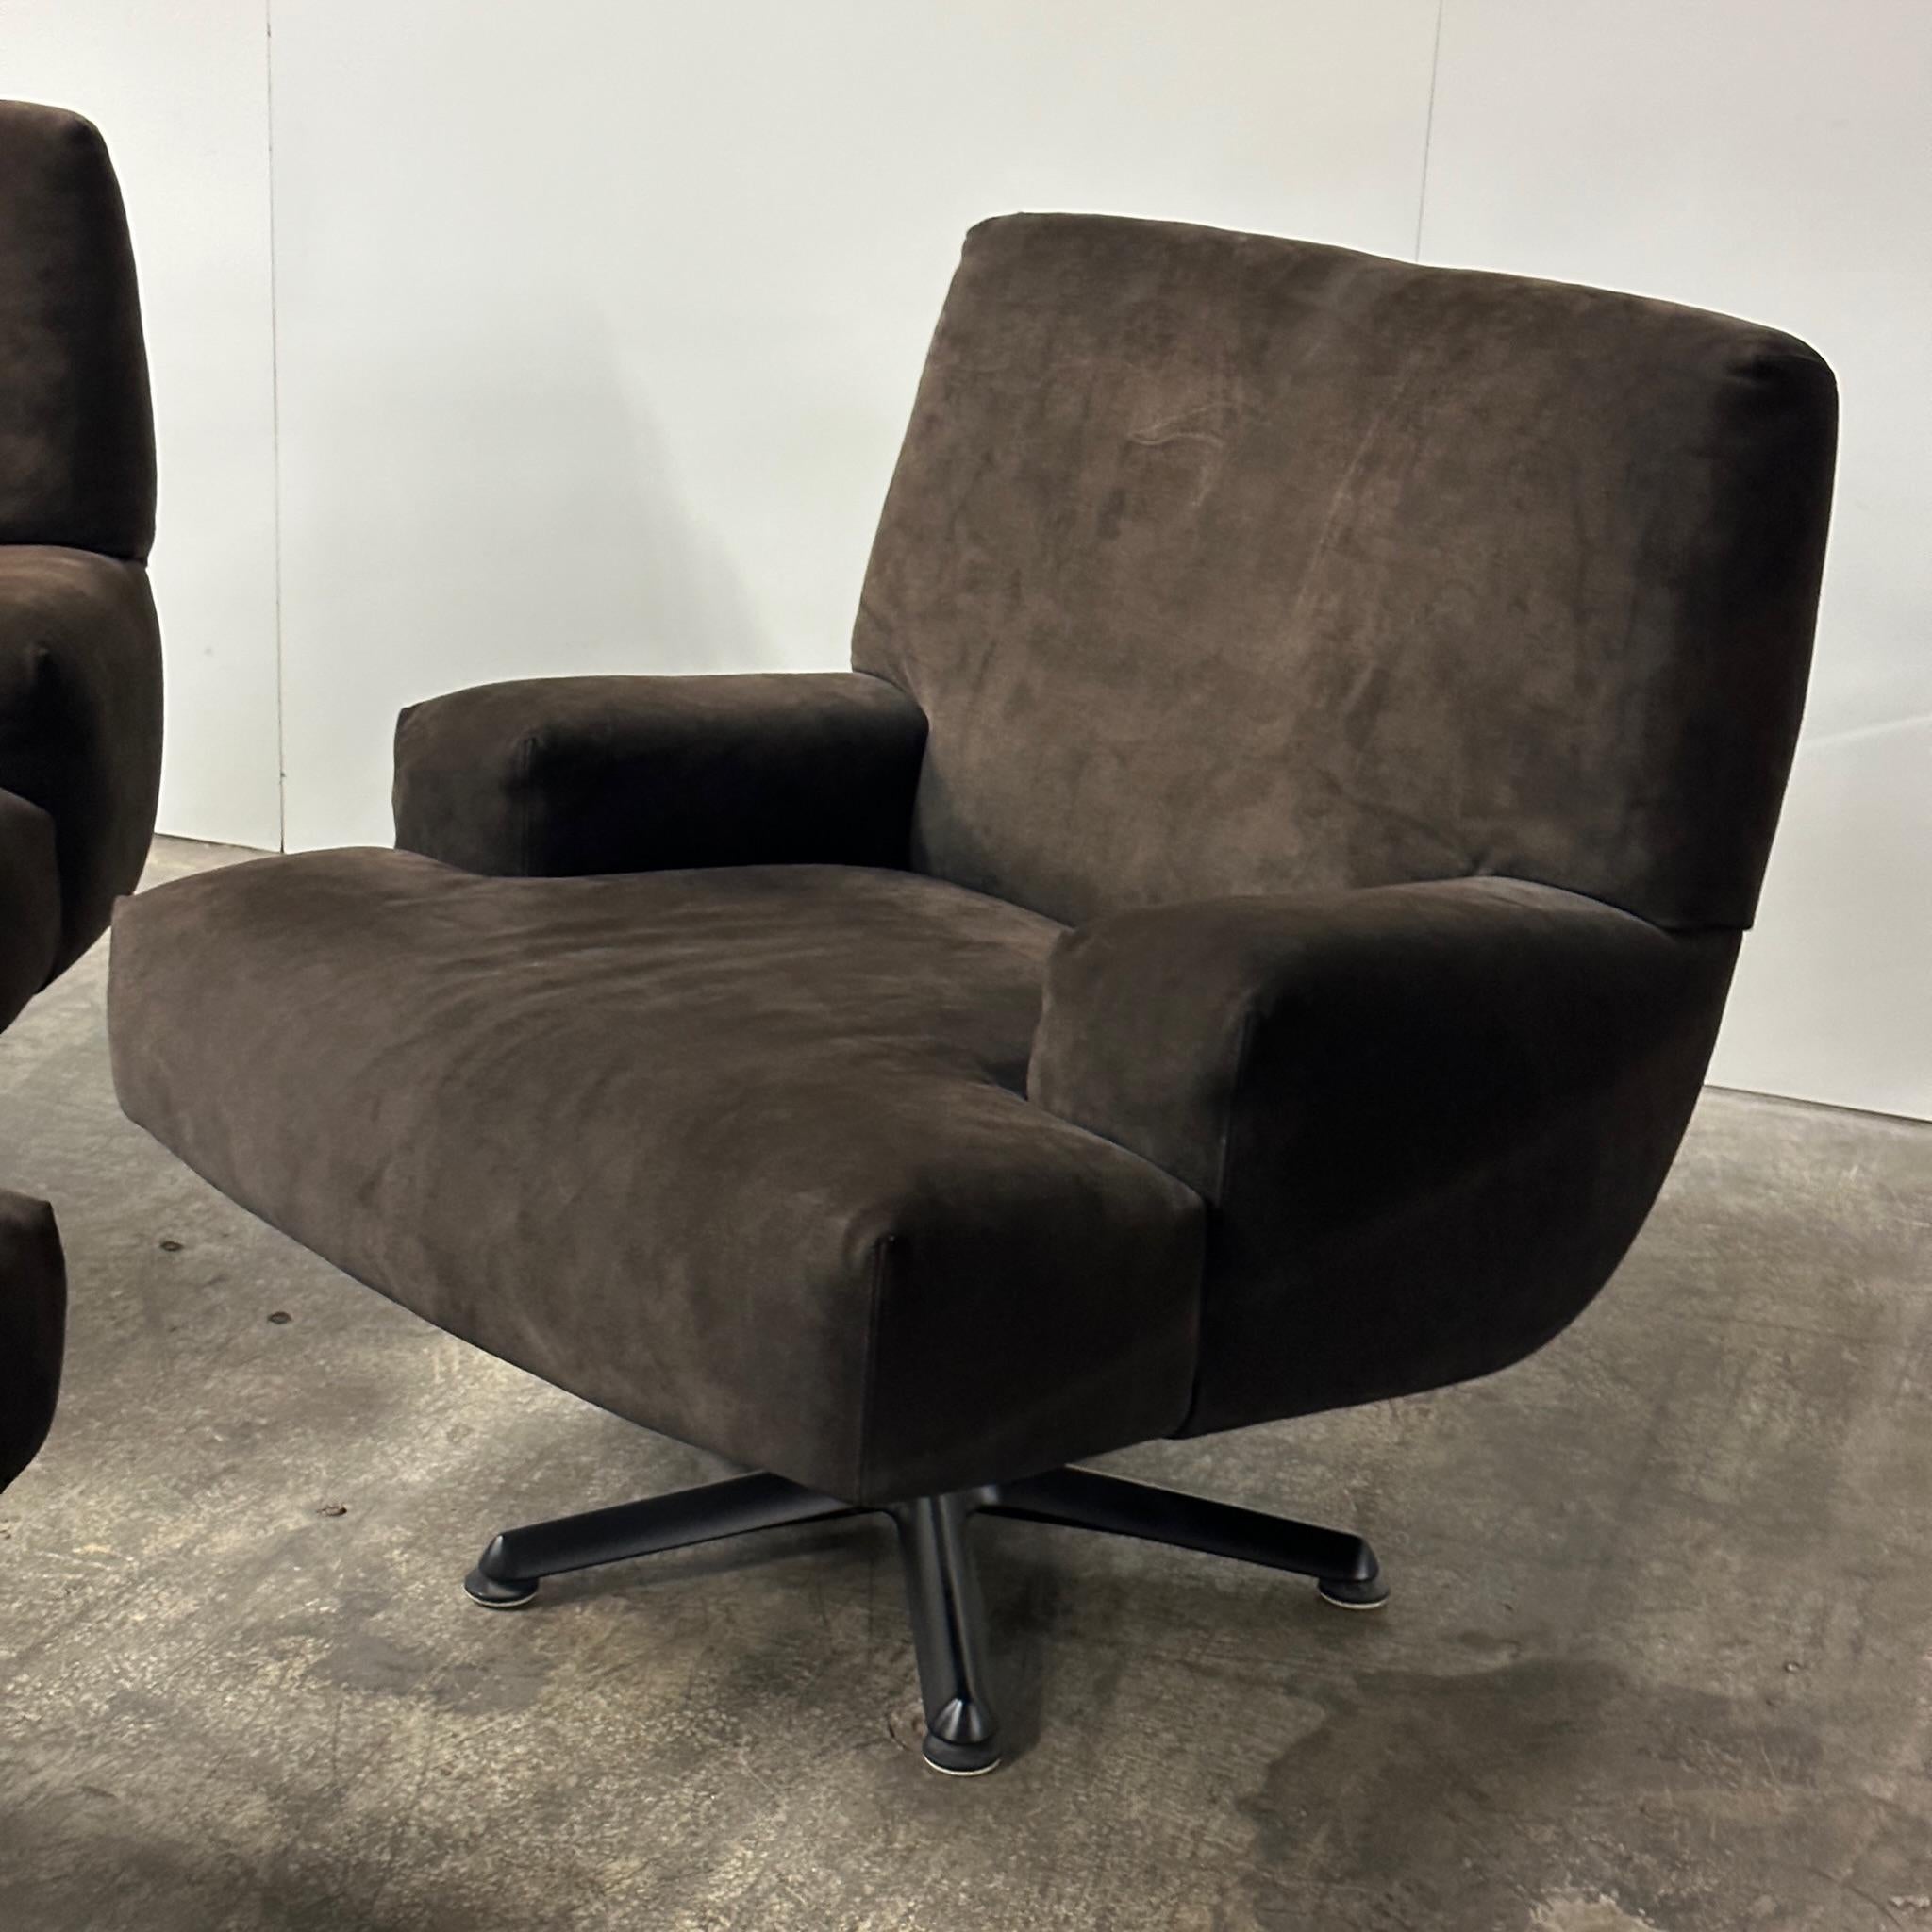 Upholstered in original think brown suede. Reclines. 

Price is for the set. Contact us if you'd like to purchase a single item.